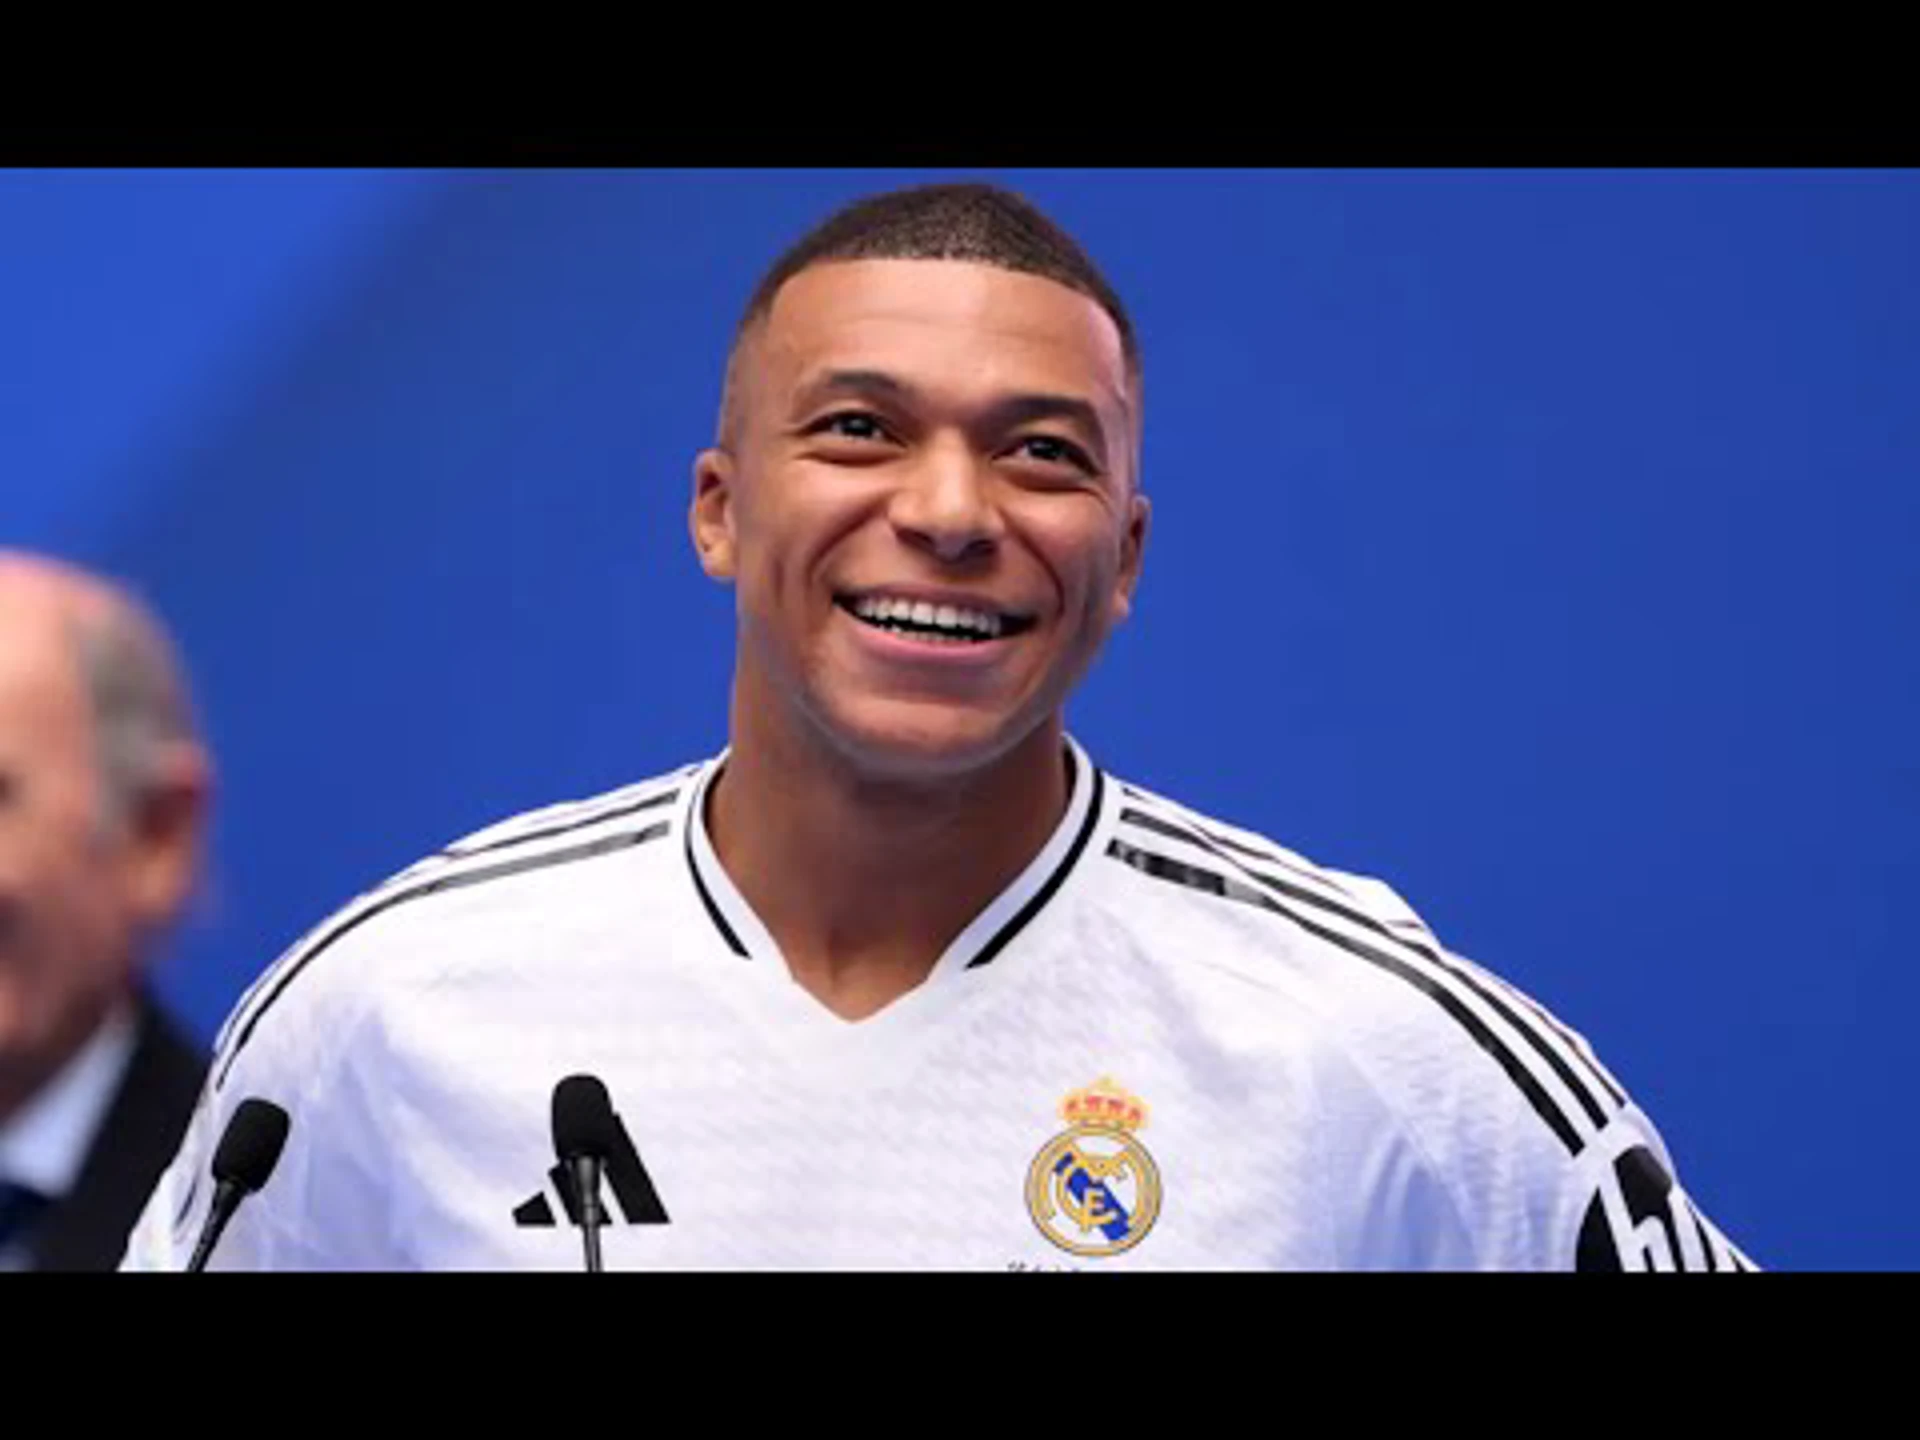 Kylian Mbappe unveiled to Real Madrid fans | LaLiga